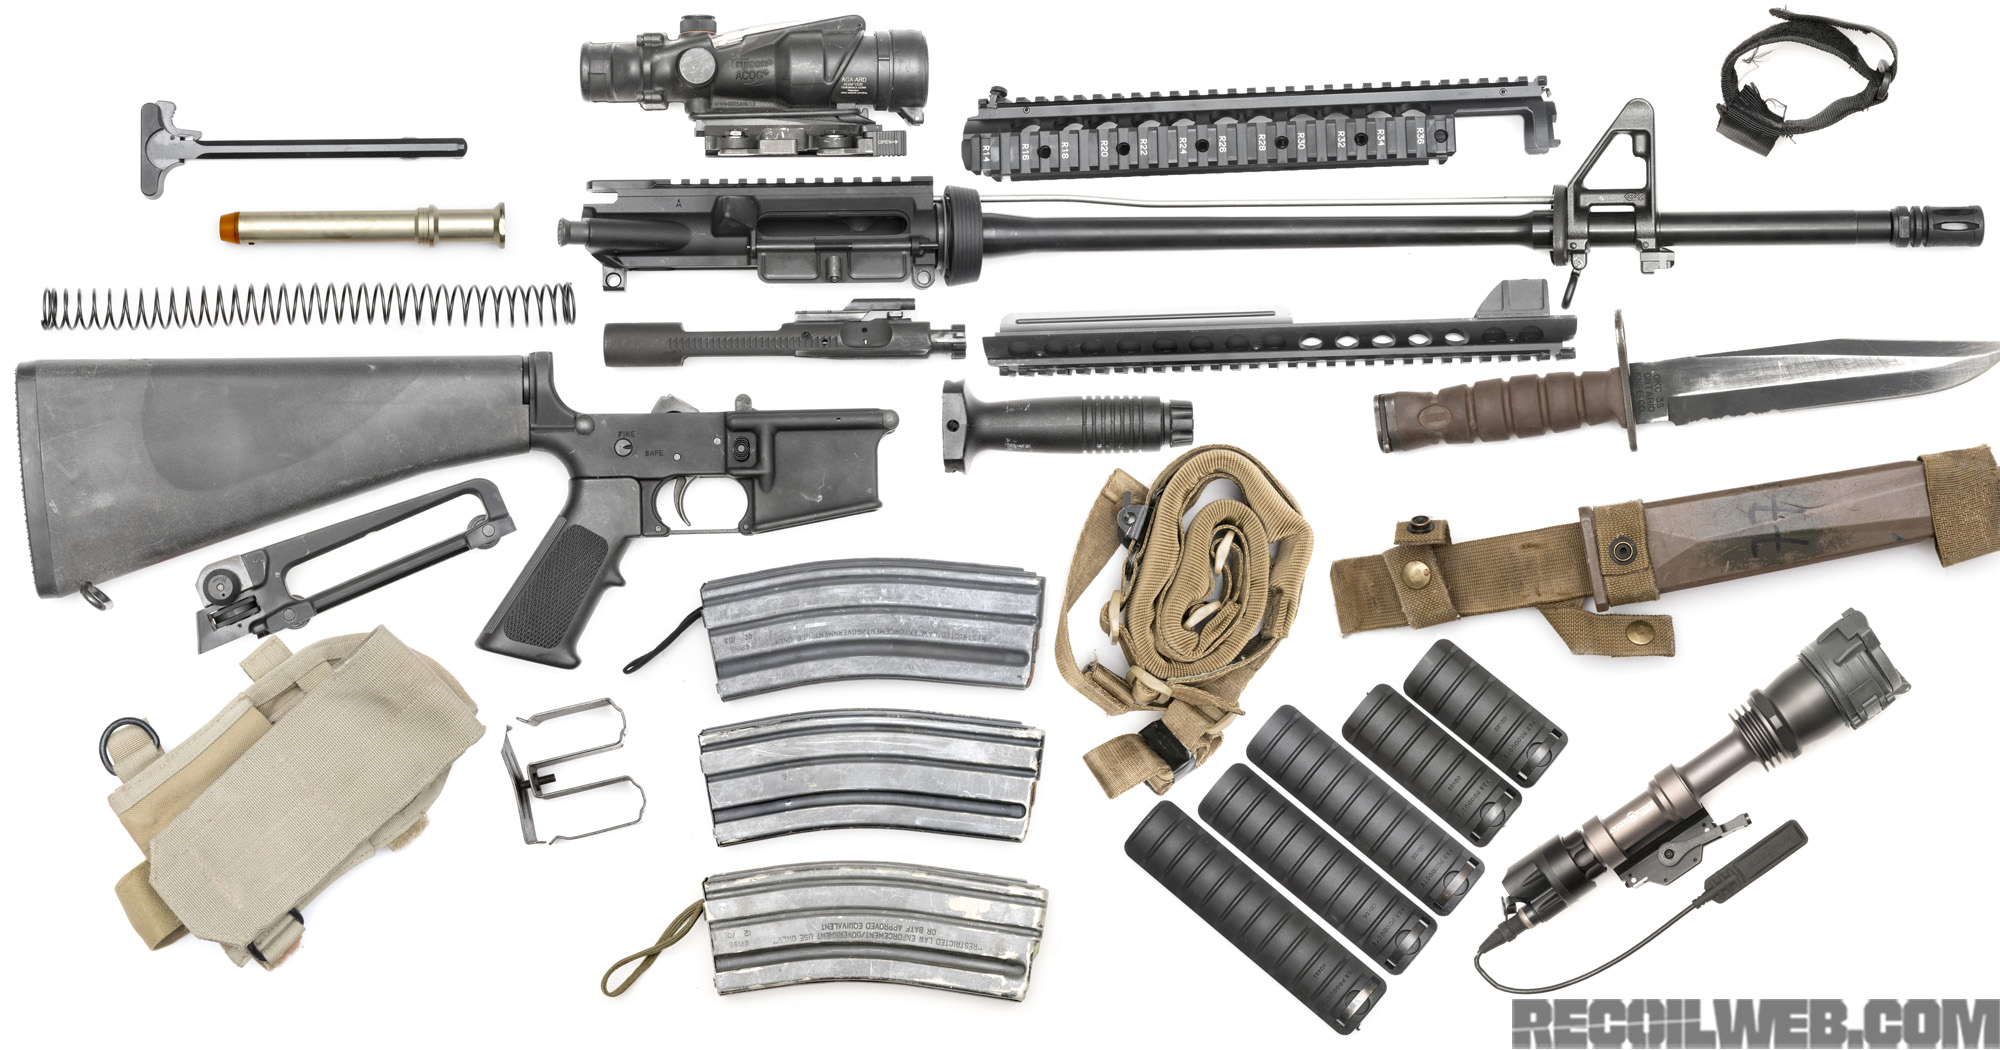 Buildsheet: M16A4 OIF Edition RECOIL